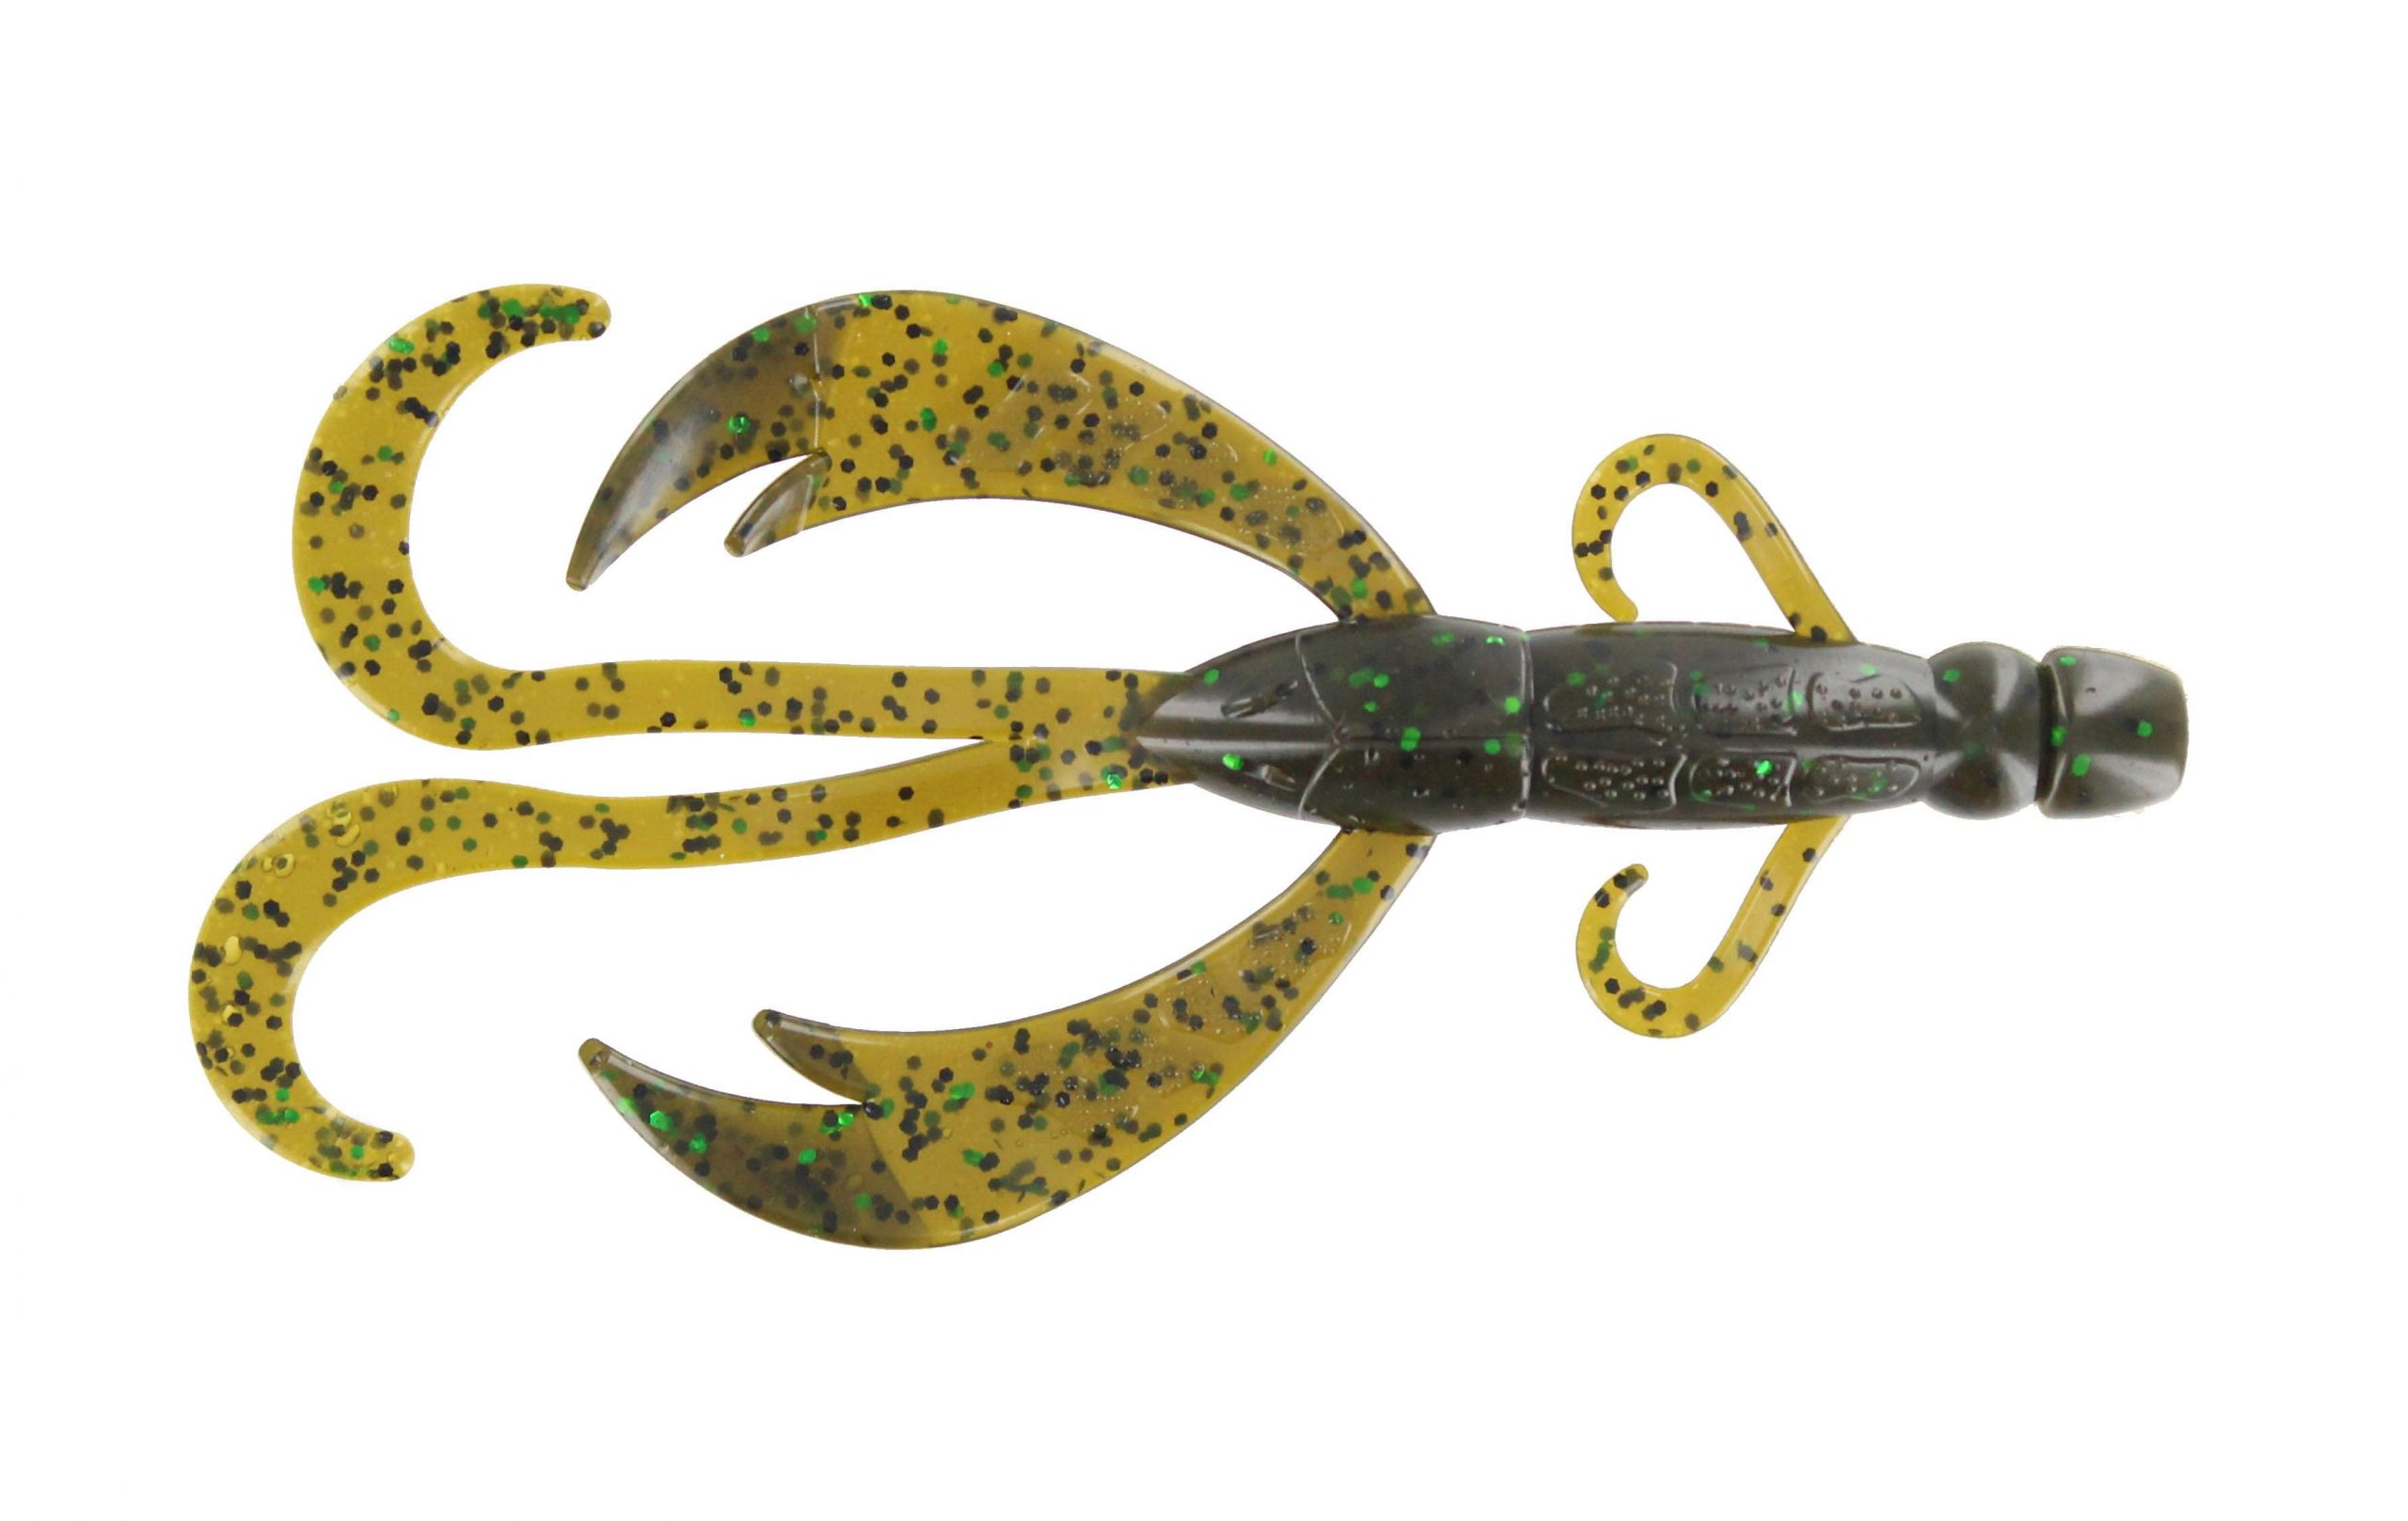 <b>Big Bite Baits Battle Bug:</b> This soft plastic creature is the first signature bait from its newest Pro Staff member Mike McClelland. The 4-inch Battle Bug has a segmented body shape with legs, craws and antenna appendages, and can be Texas-rigged or as a punchbait trailer. $3.99 per 7 pack; <a href=